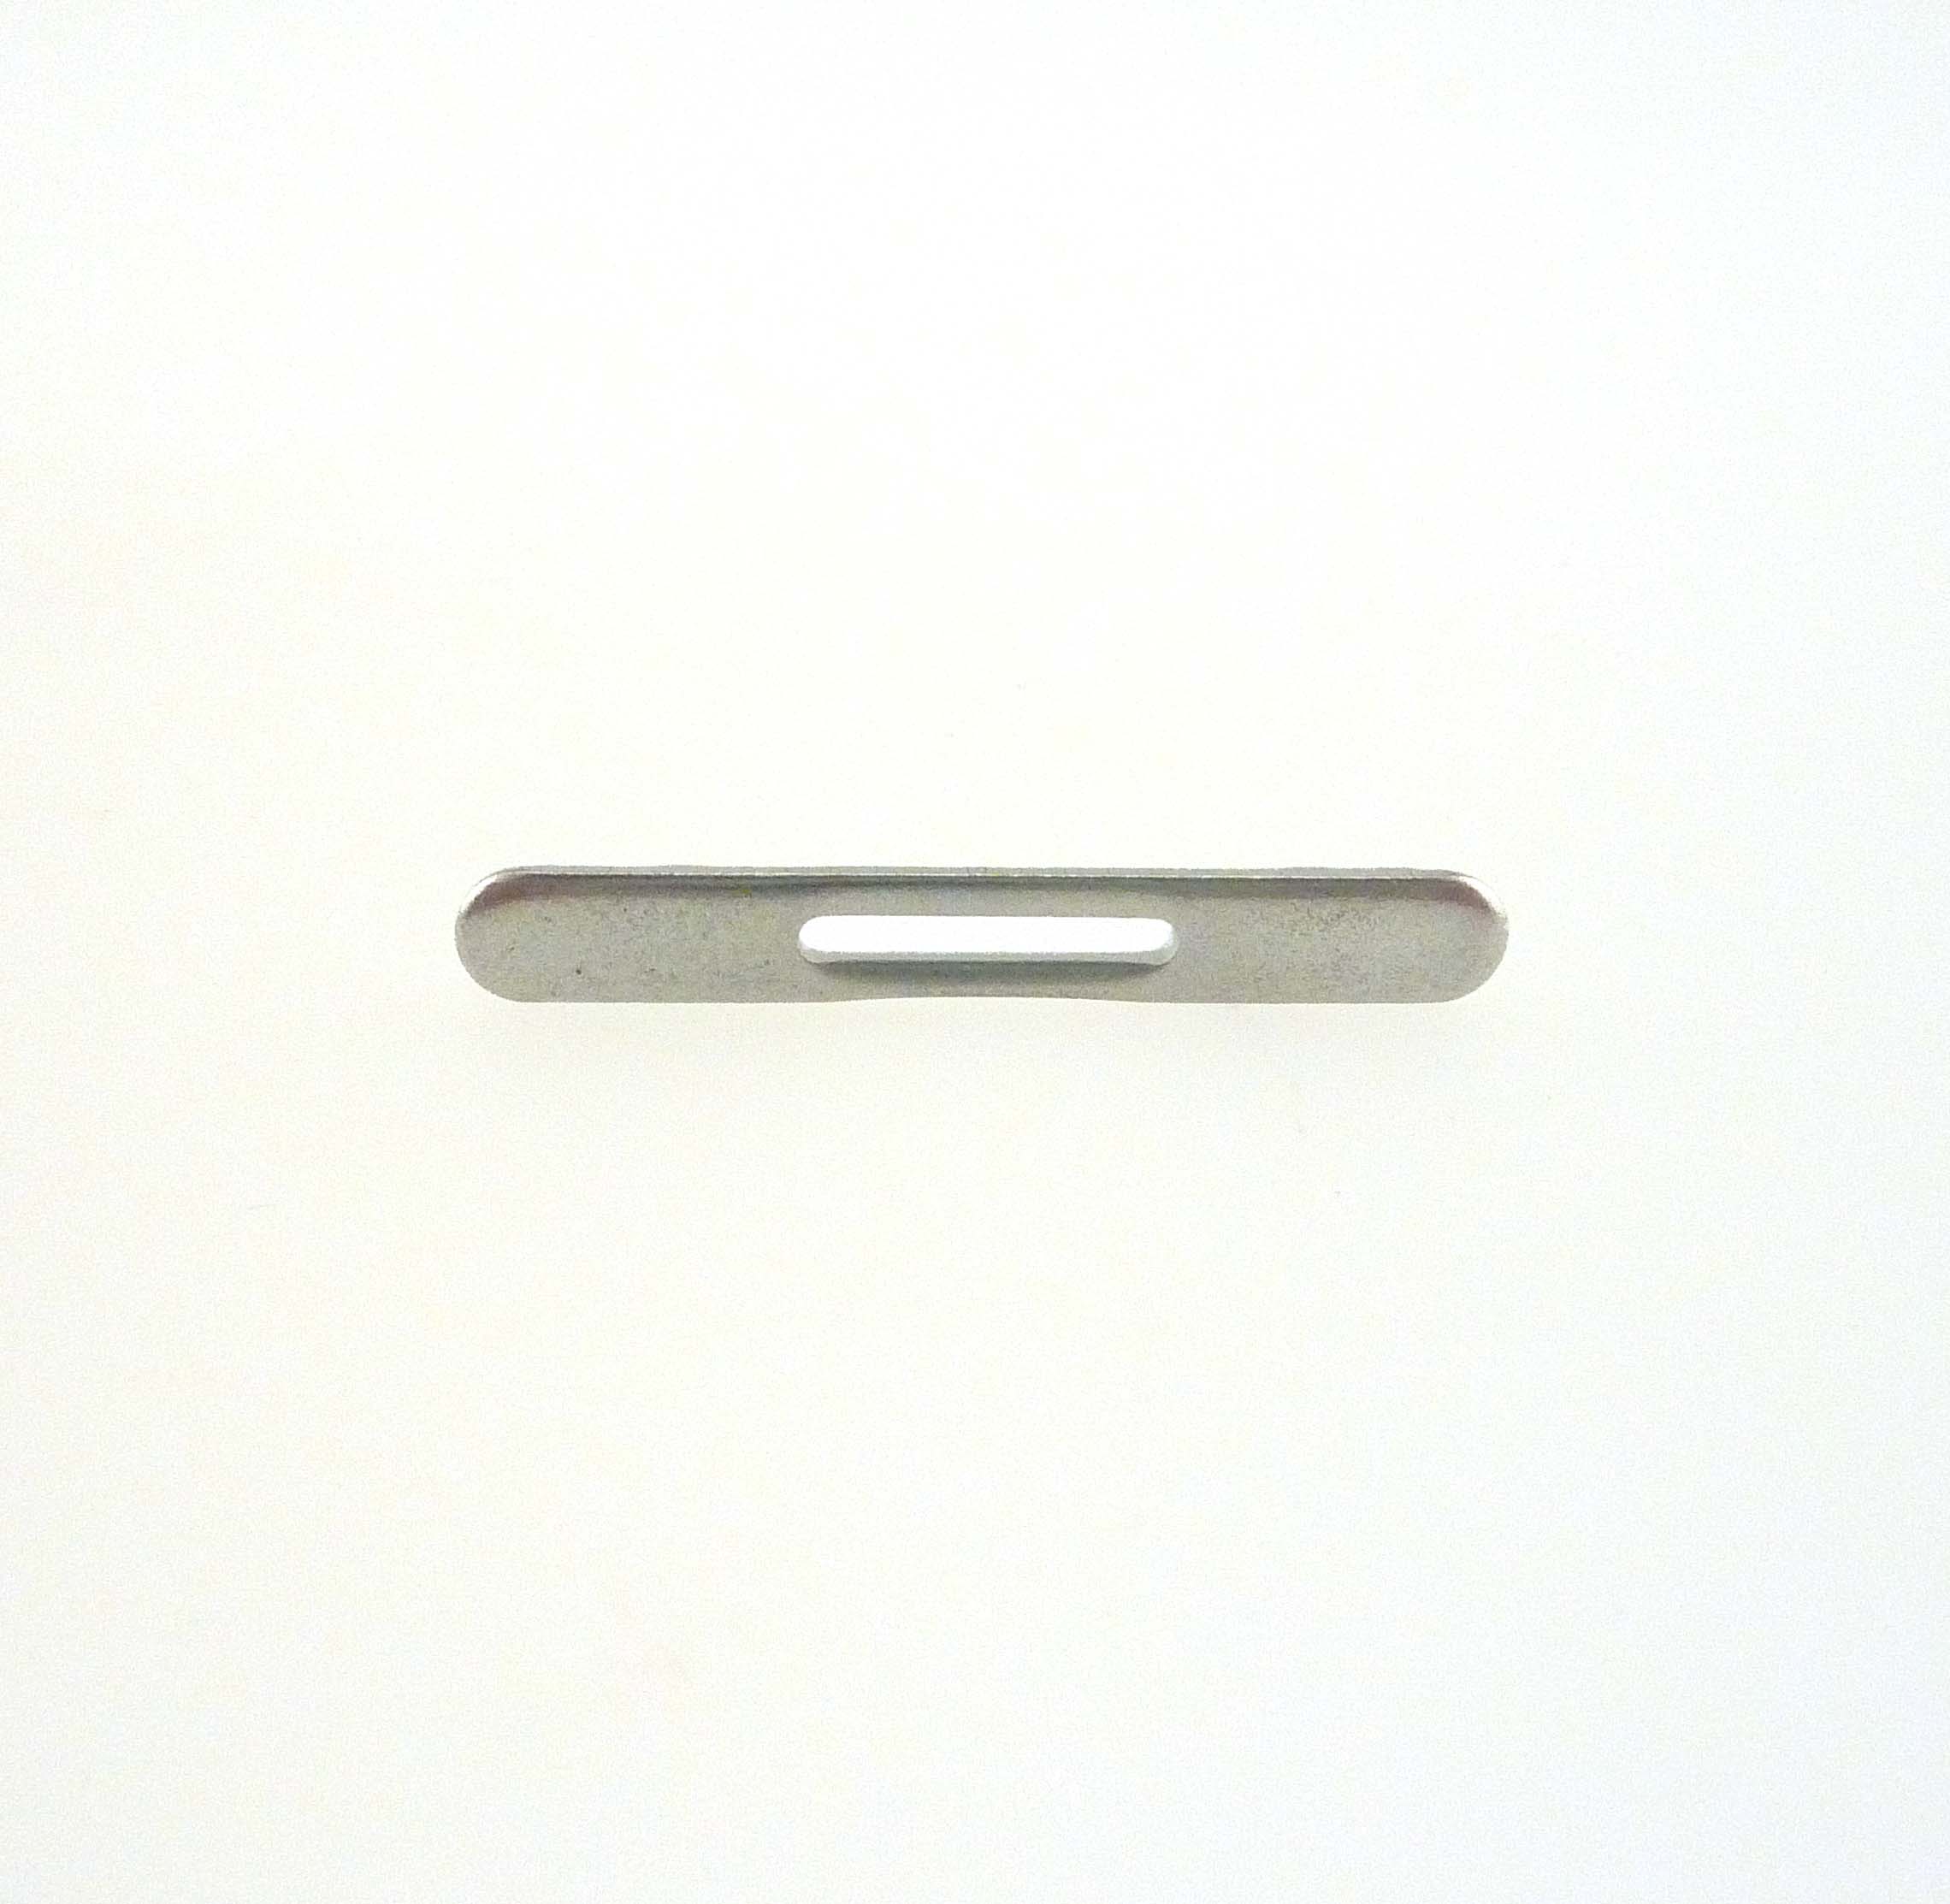 "PADDLE" TOGGLE PLATE FOR 1/16"